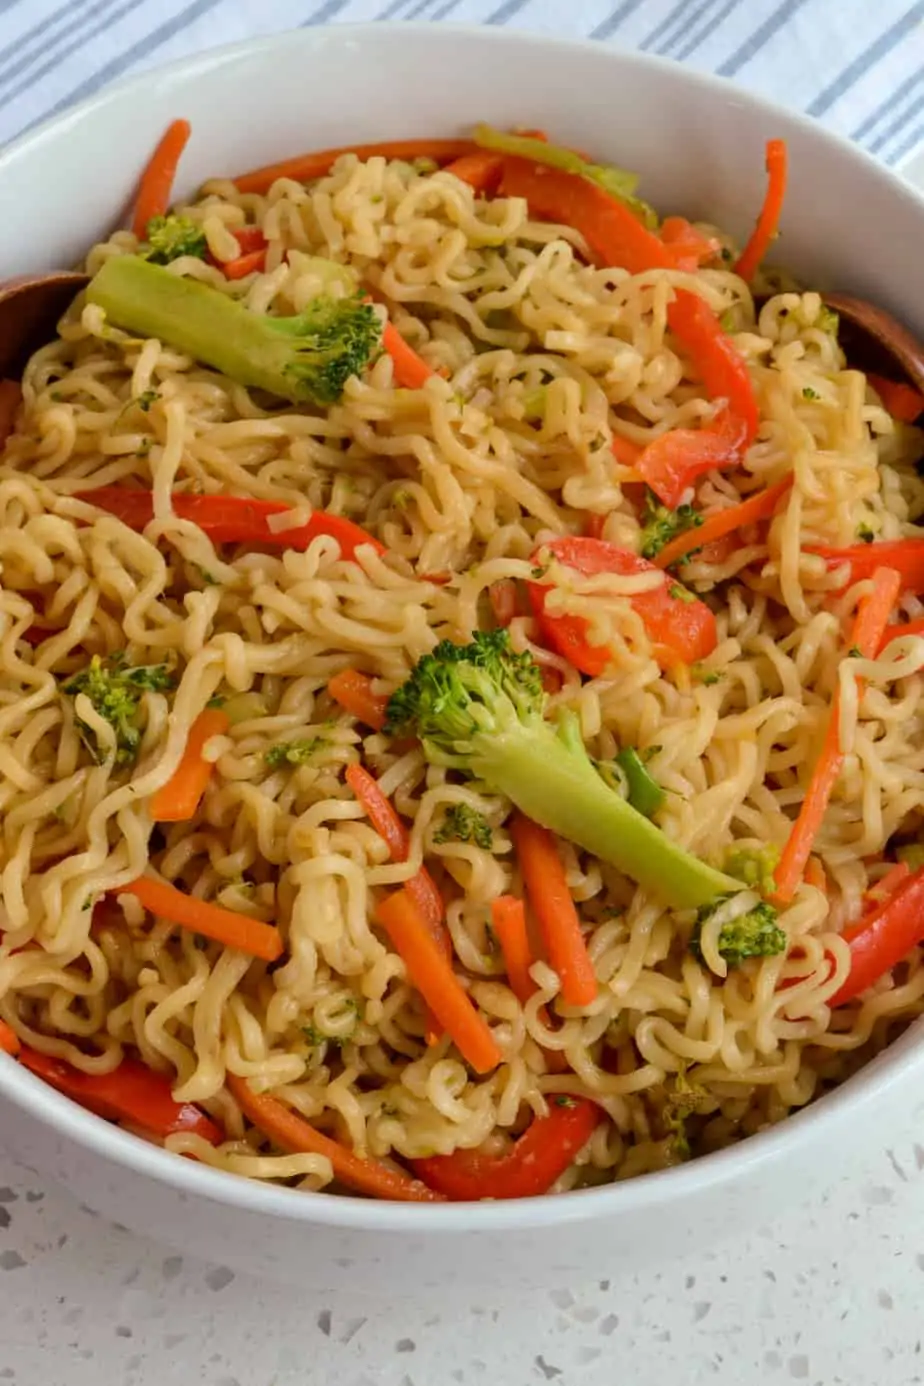 Noodle stir fry recipe with broccoli, red bell peppers, and carrots with an Asian sauce. 